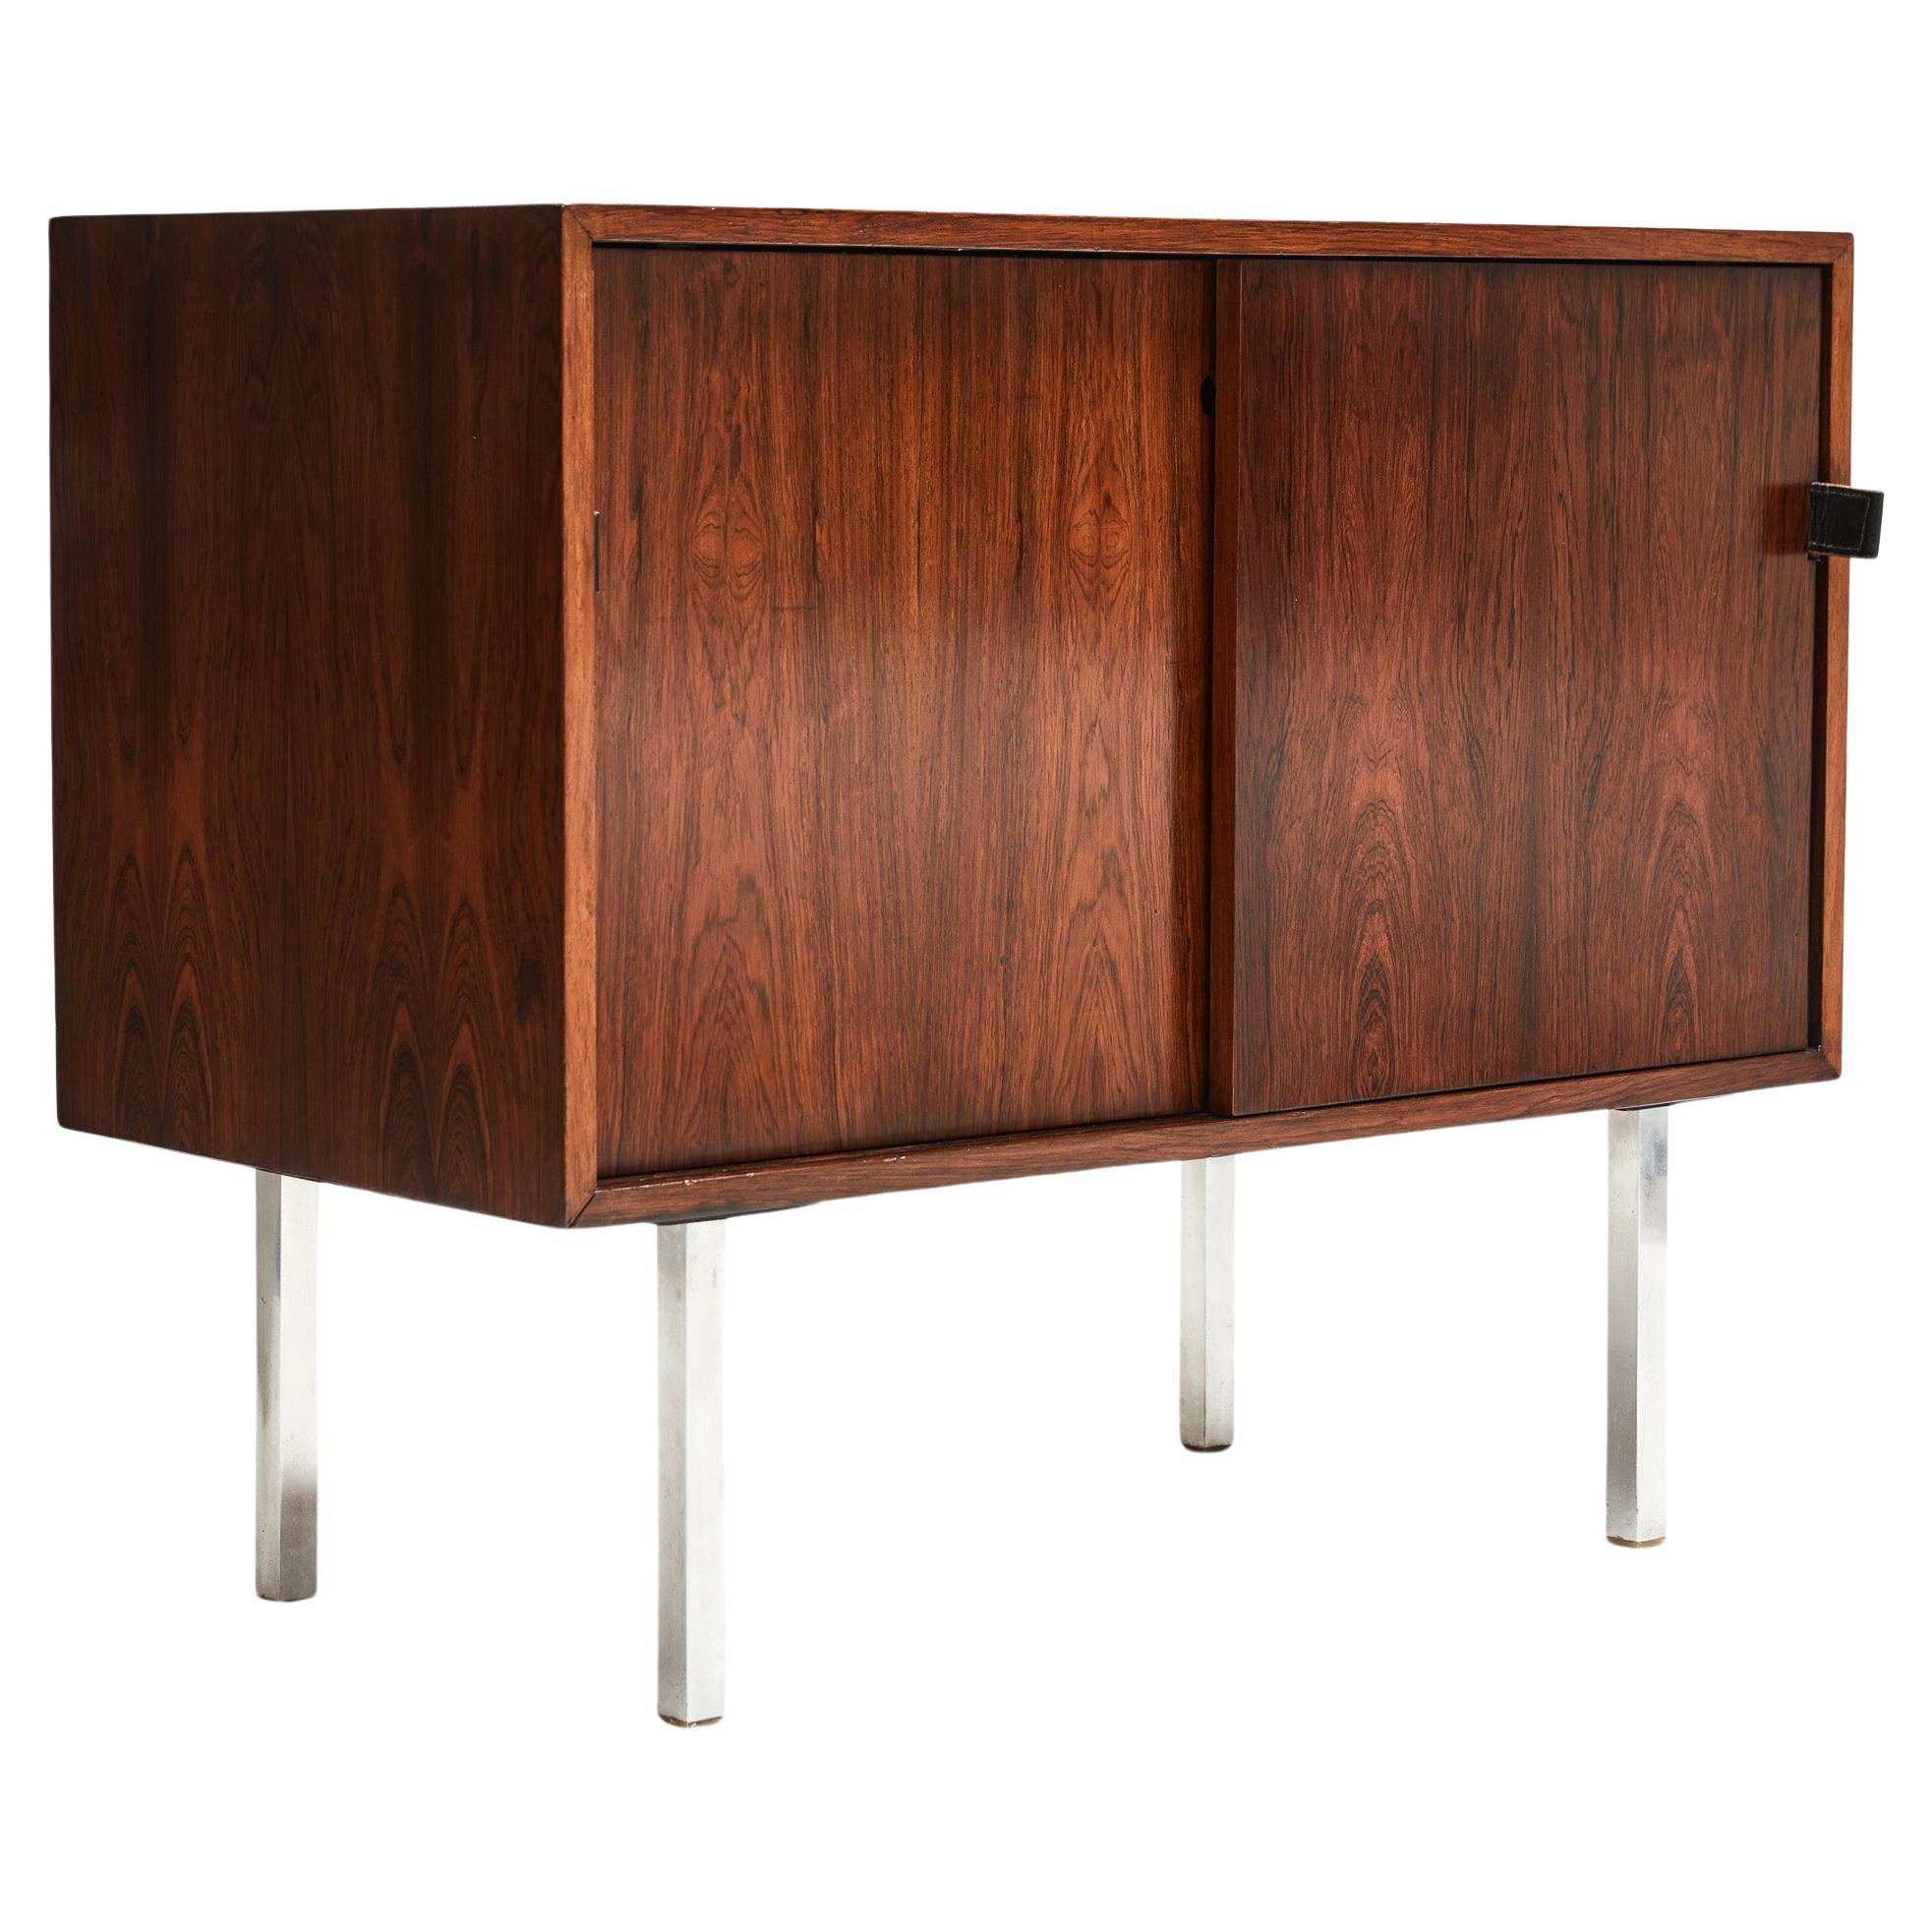 Available today, this Mid-Century Modern Chest in Hardwood, designed by Knoll International and produced by Forma Moveis in Brazil in the 1960s is a showstopper!

This Mid-Century Modern gem is made of Brazilian Rosewood, known as Jacaranda, and